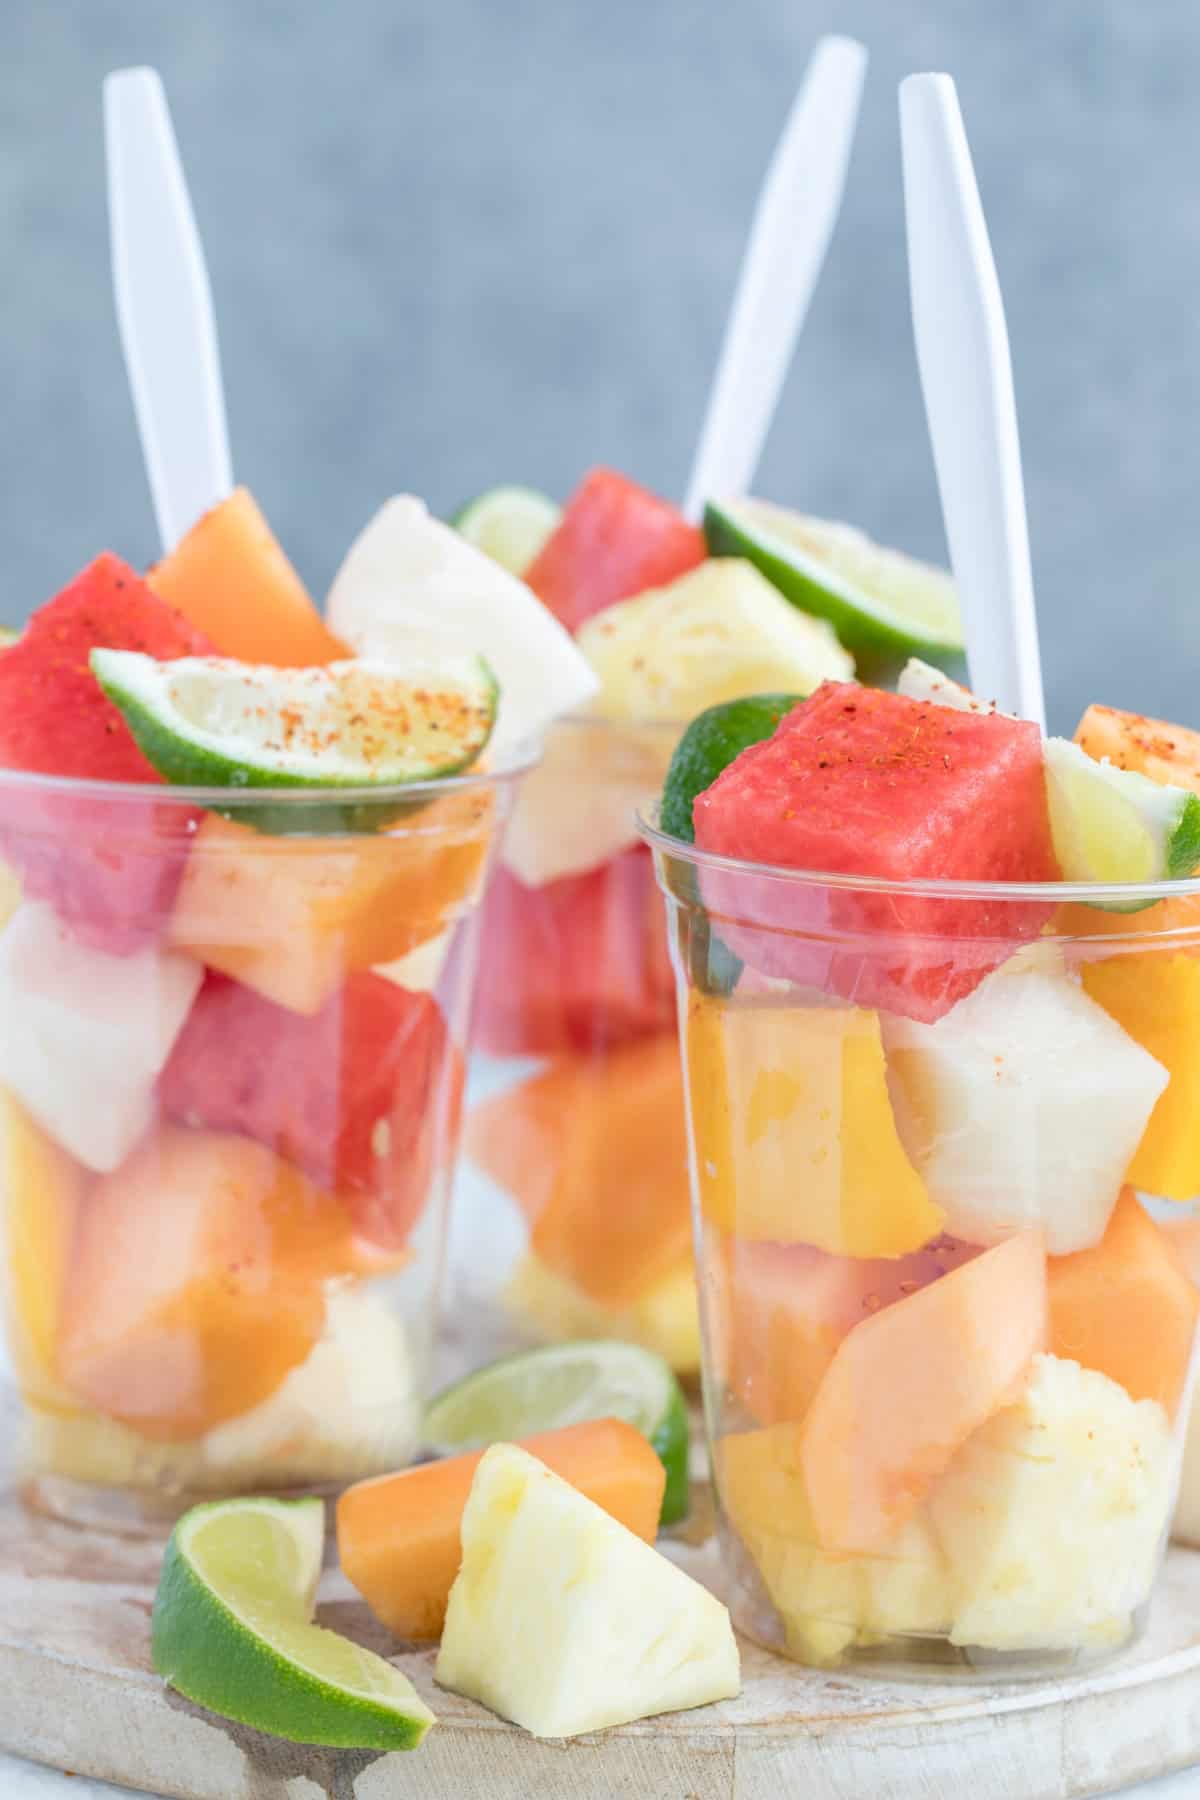 https://www.theharvestkitchen.com/wp-content/uploads/2020/05/easy-mexican-style-fruit-cups-scaled.jpg